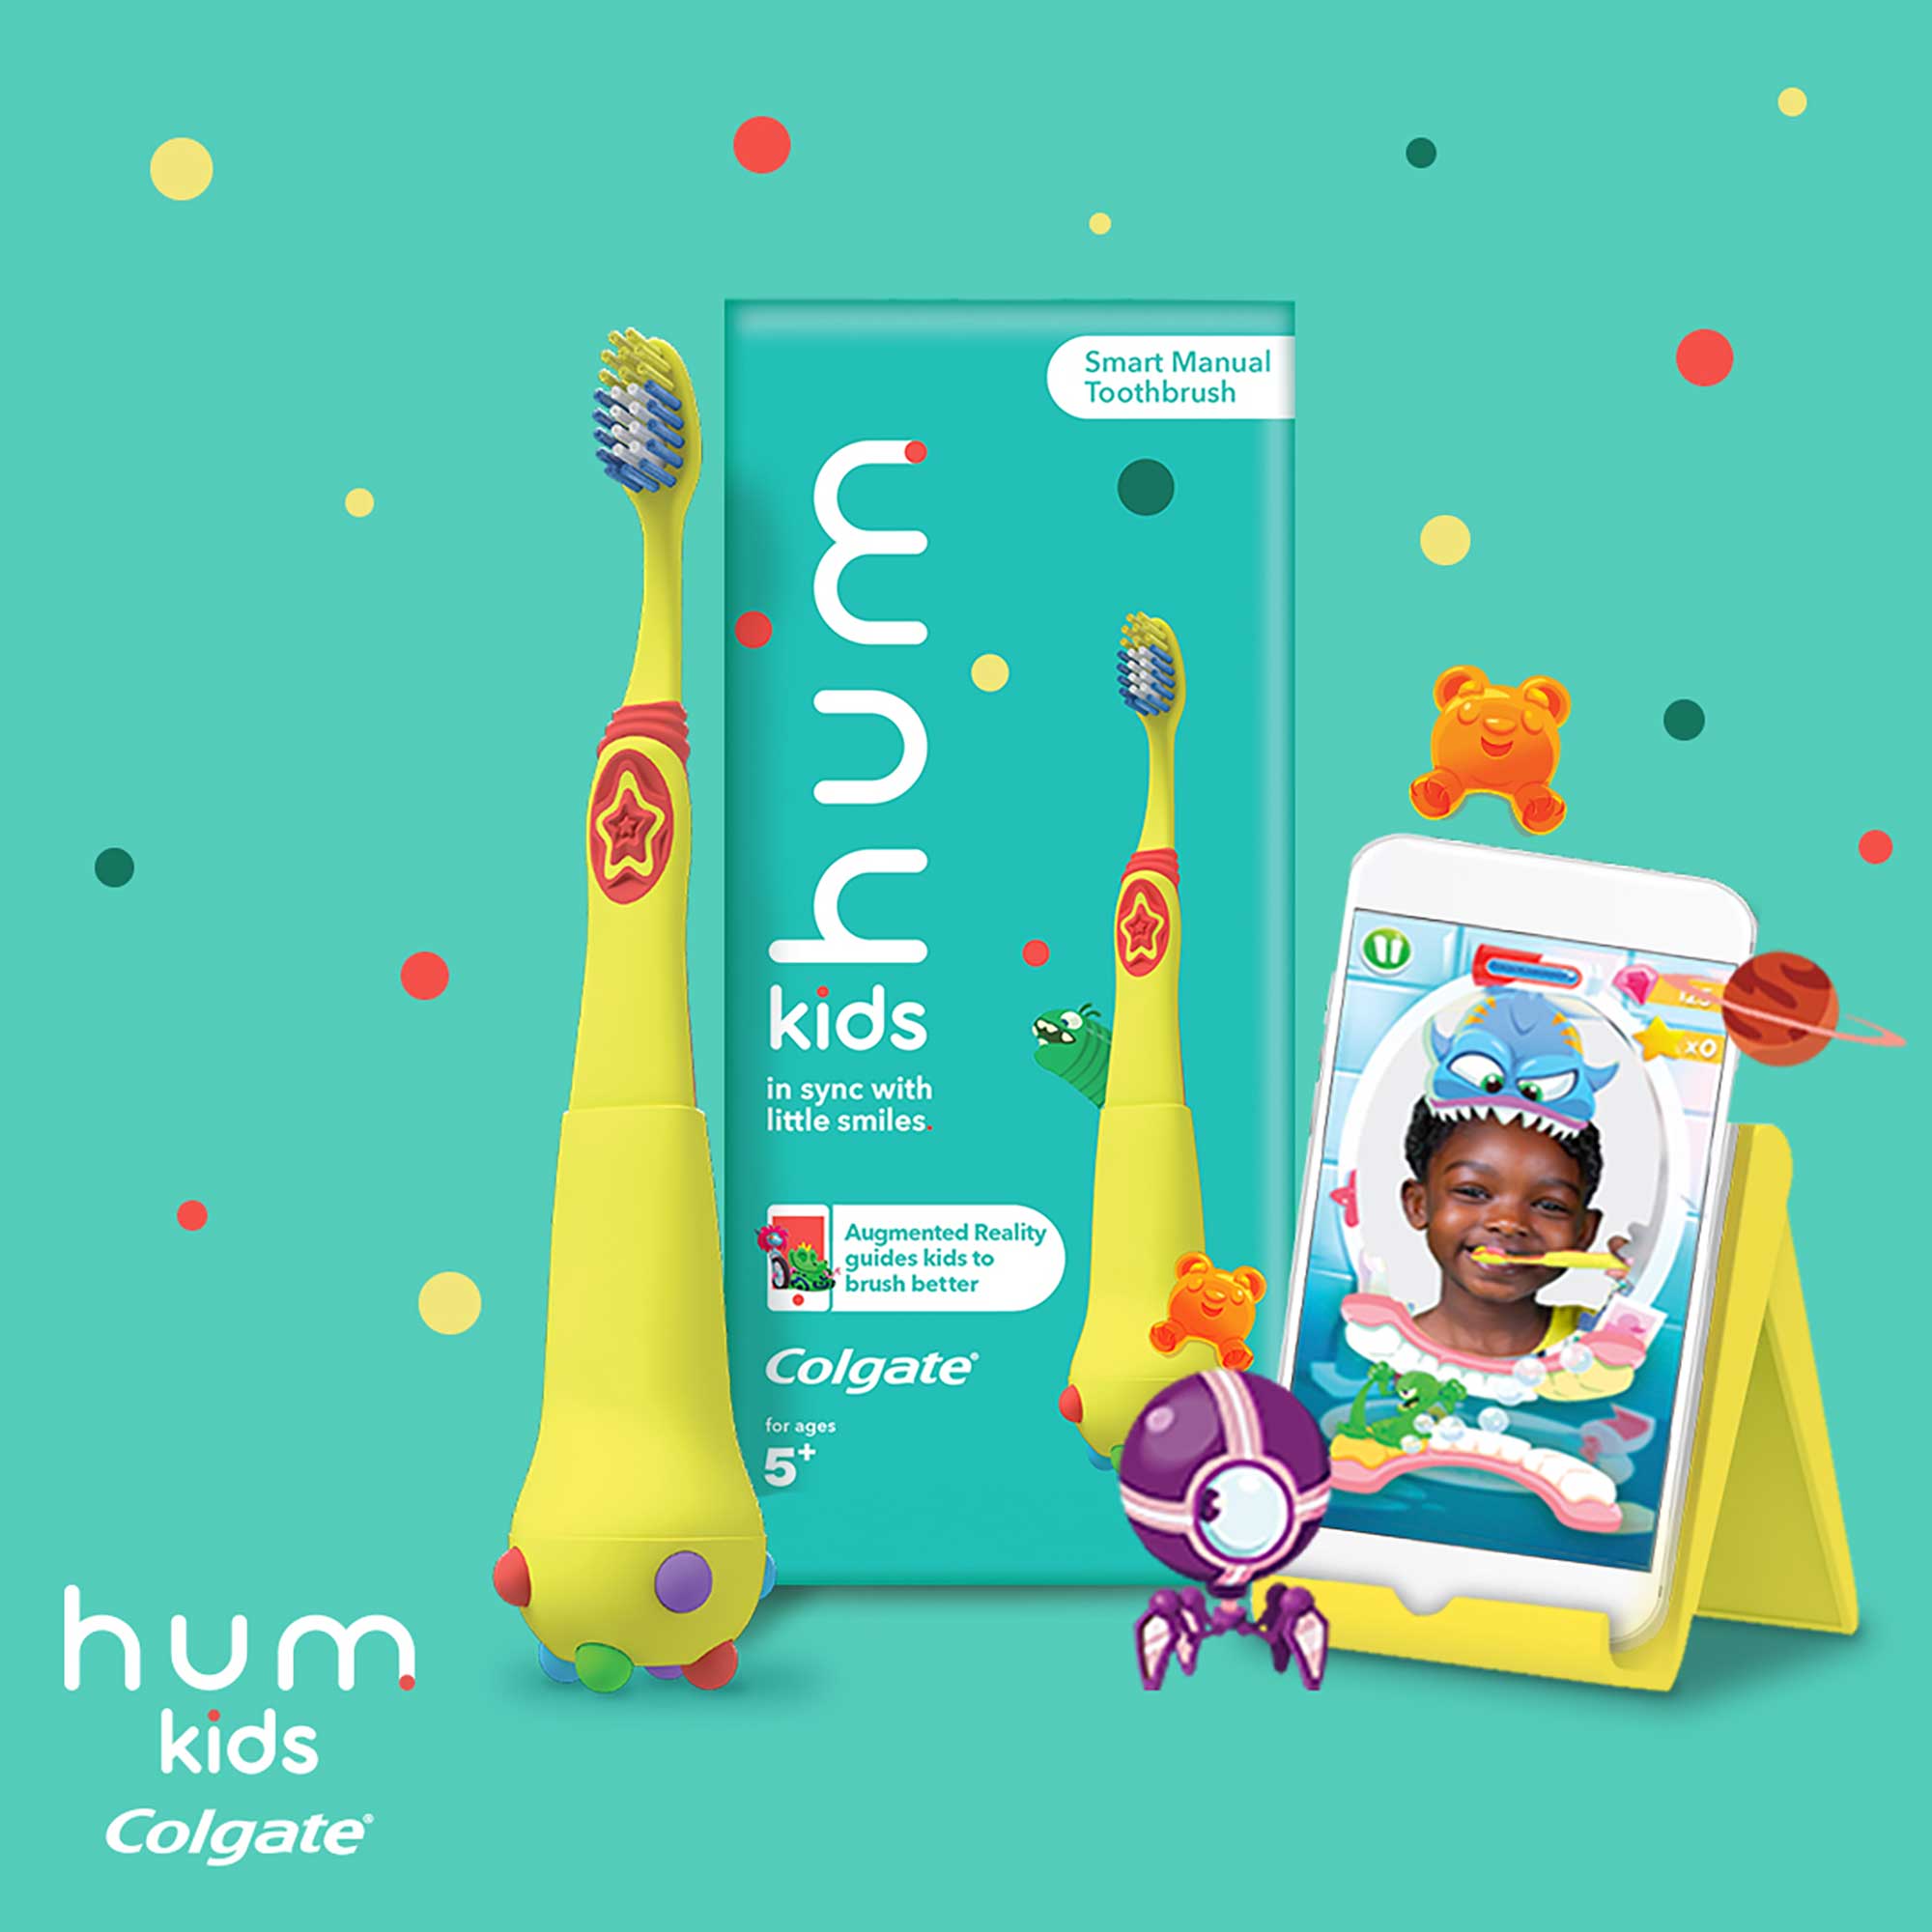 New hum kids by Colgate Makes Brushing Fun While Helping to Build